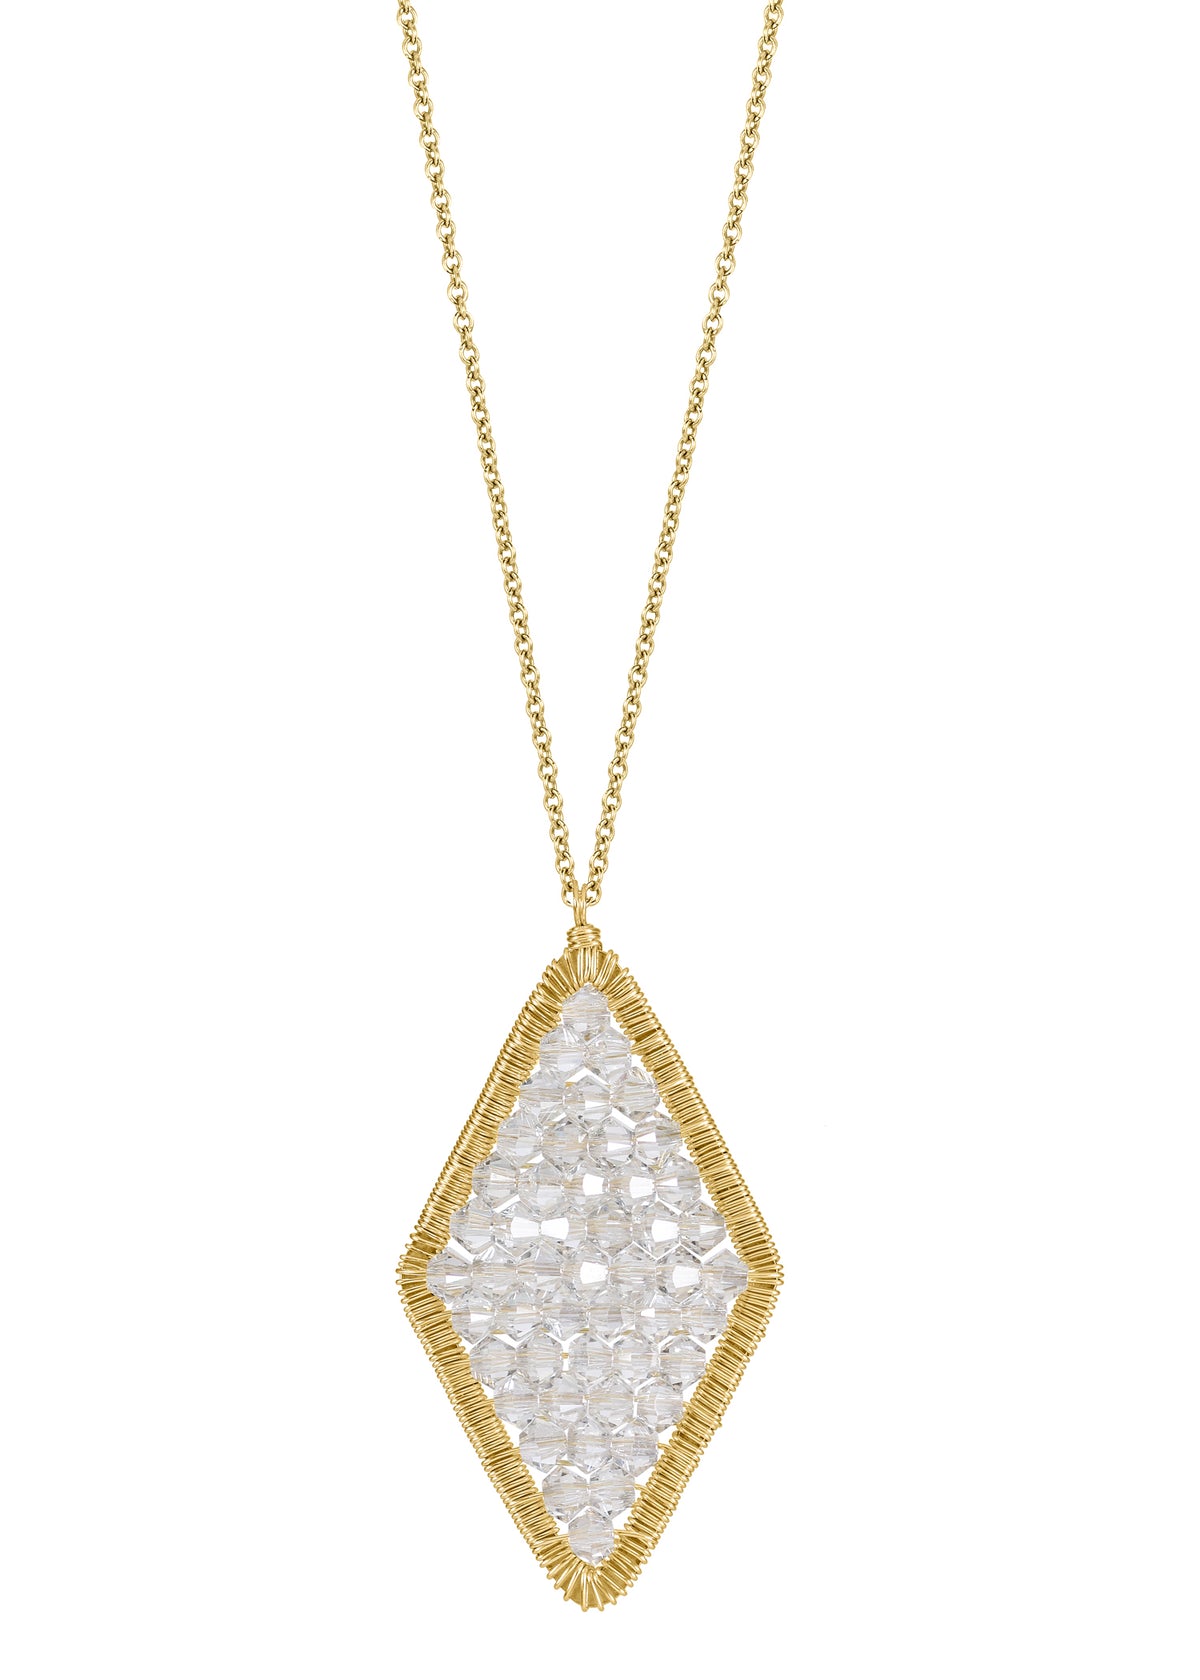 Crystal 14k gold fill Necklace measures 17&quot; in length Pendant measures 1-3/8&quot; in length and 3/4&quot; in width at the widest point Handmade in our Los Angeles studio